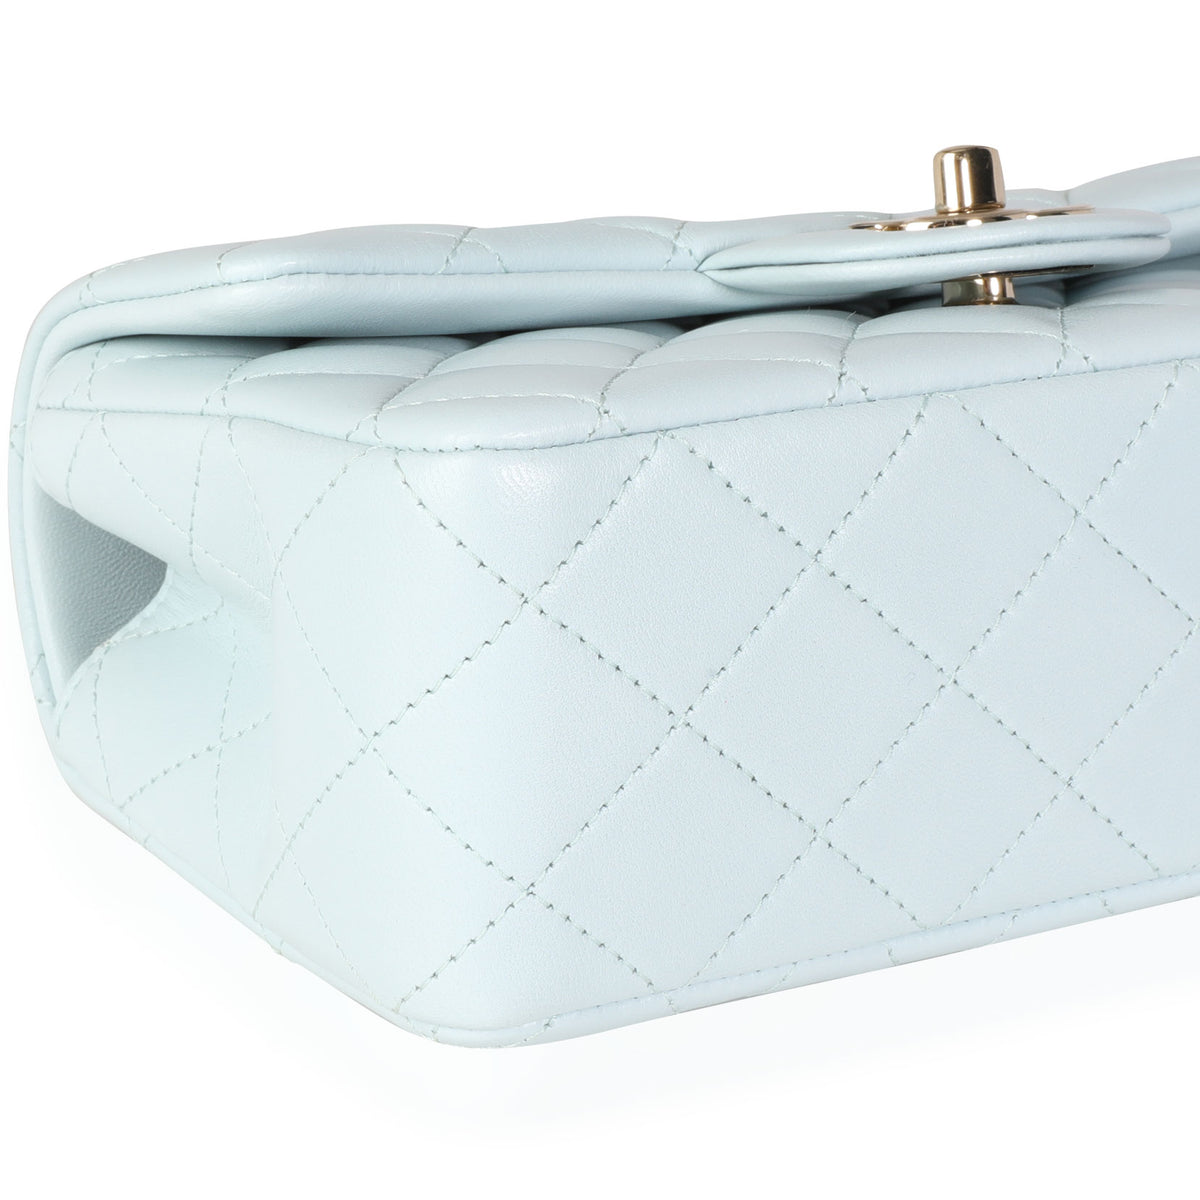 Chanel Blue Iridescent Quilted Calfskin Mini Flap Silver Hardware